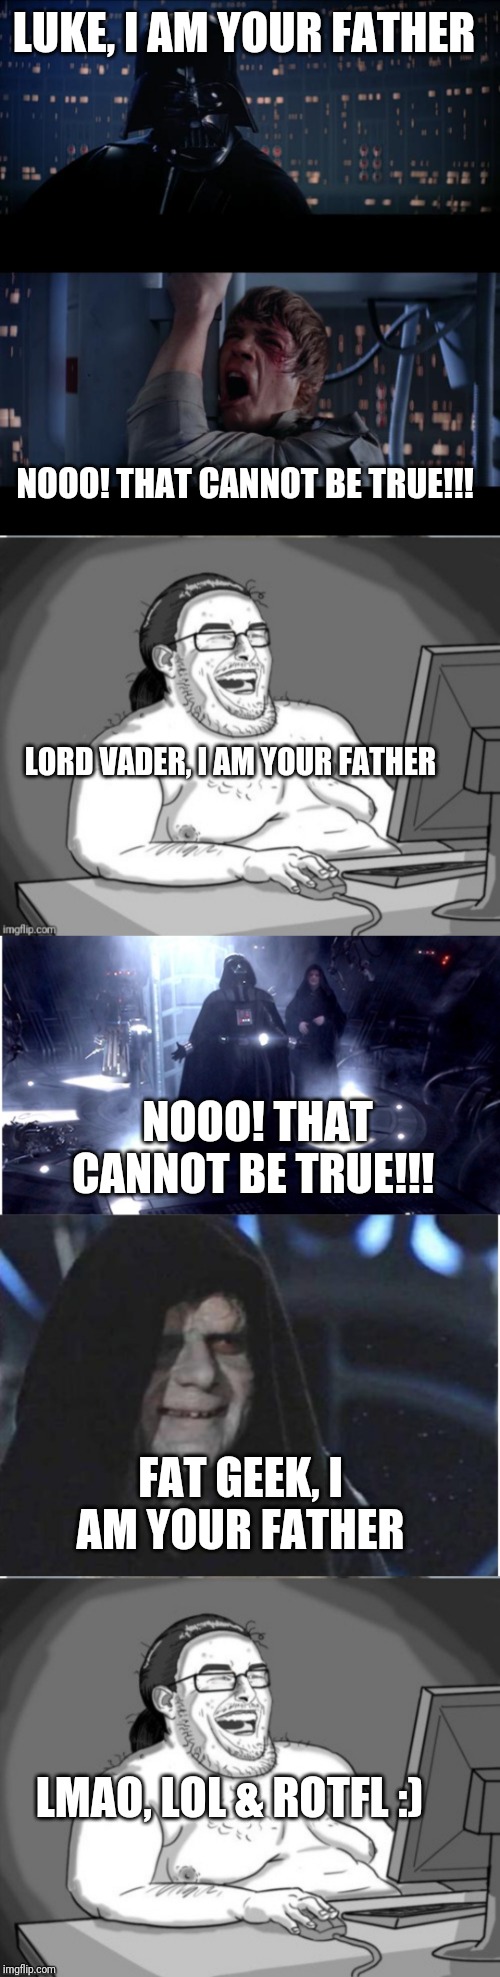 LUKE, I AM YOUR FATHER; NOOO! THAT CANNOT BE TRUE!!! LORD VADER, I AM YOUR FATHER; NOOO! THAT CANNOT BE TRUE!!! FAT GEEK, I AM YOUR FATHER; LMAO, LOL & ROTFL :) | image tagged in memes,star wars no | made w/ Imgflip meme maker